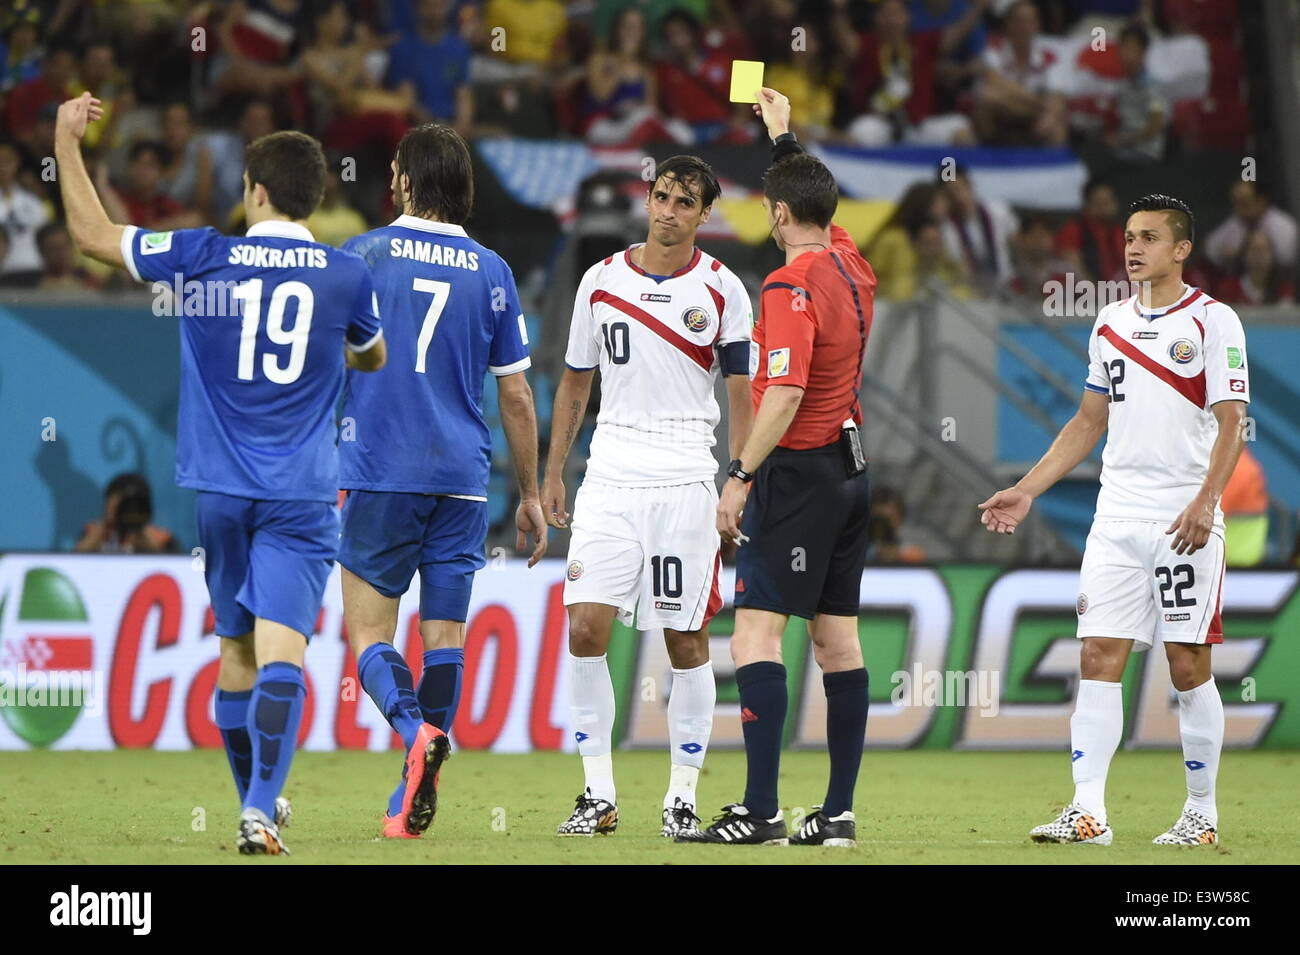 Recife, Brazil. 29th June, 2014. Australia's referee Benjamin Williams (2nd R) shows a yellow card to Costa Rica's Bryan Ruiz (3rd R) during a Round of 16 match between Costa Rica and Greece of 2014 FIFA World Cup at the Arena Pernambuco Stadium in Recife, Brazil, on June 29, 2014. Credit:  Lui Siu Wai/Xinhua/Alamy Live News Stock Photo